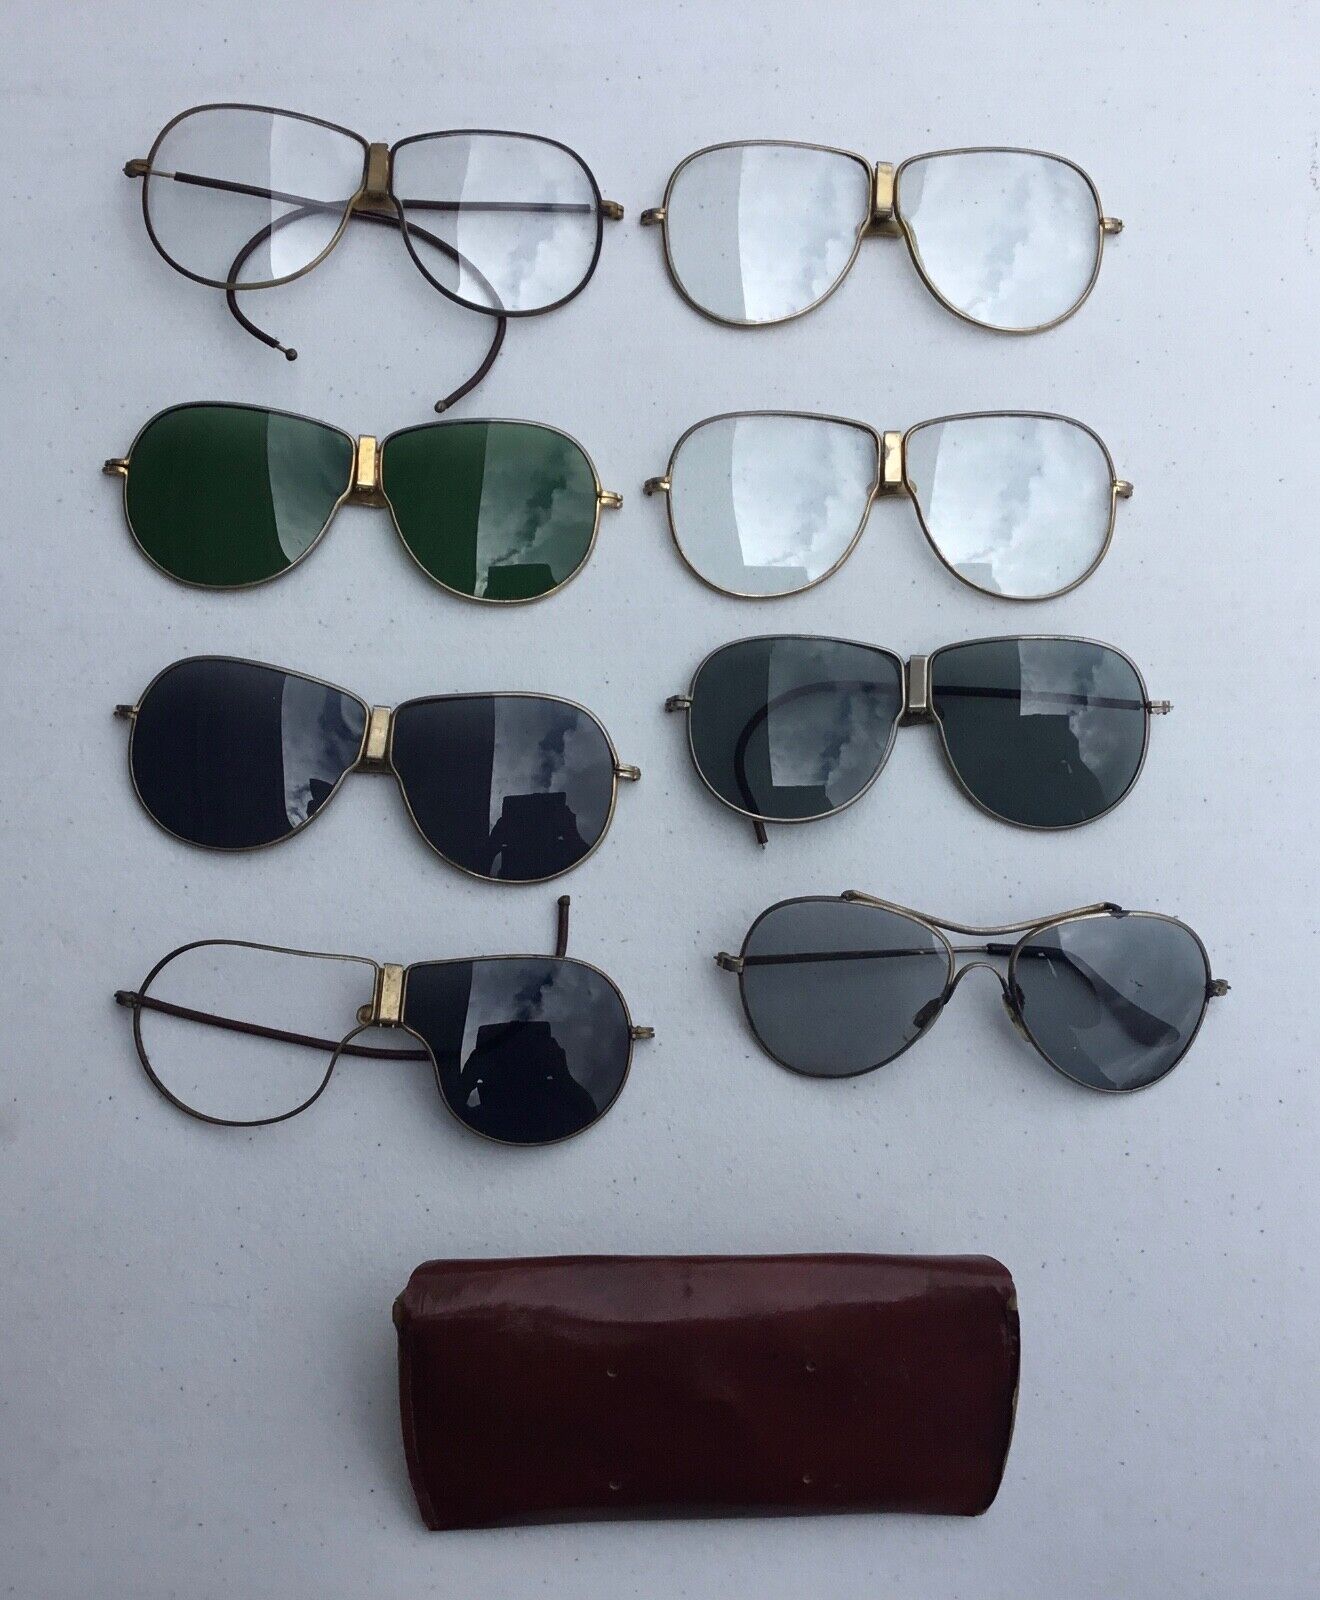 Lot of 8 Vintage Aviator Sunglasses & Glasses for Parts 1 Case Green Clear Lense